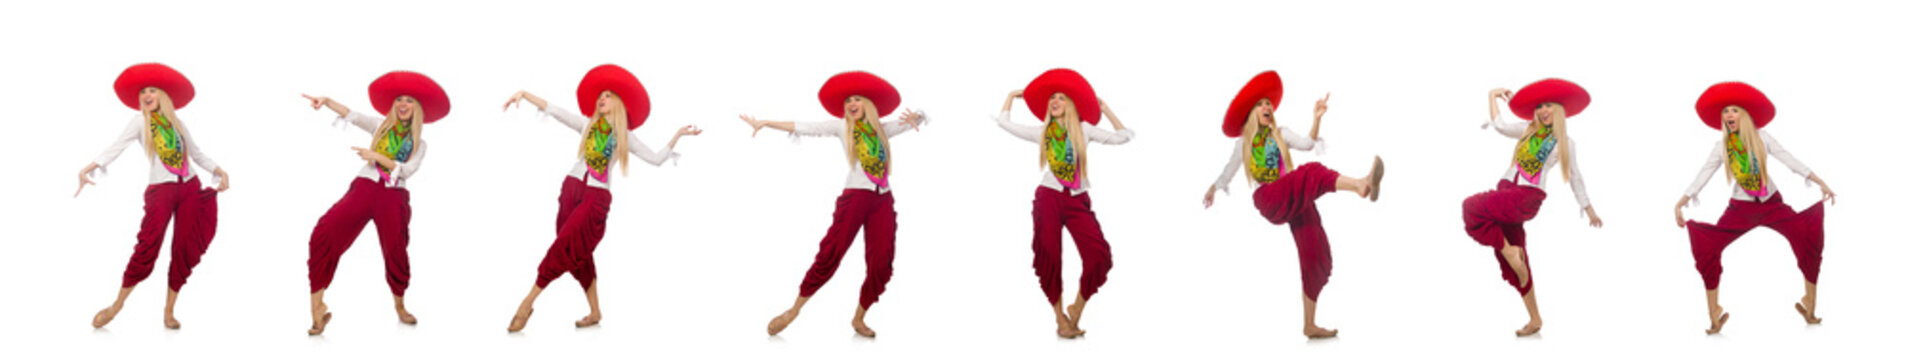 Mexican Girl With Sombrero Dancing On White